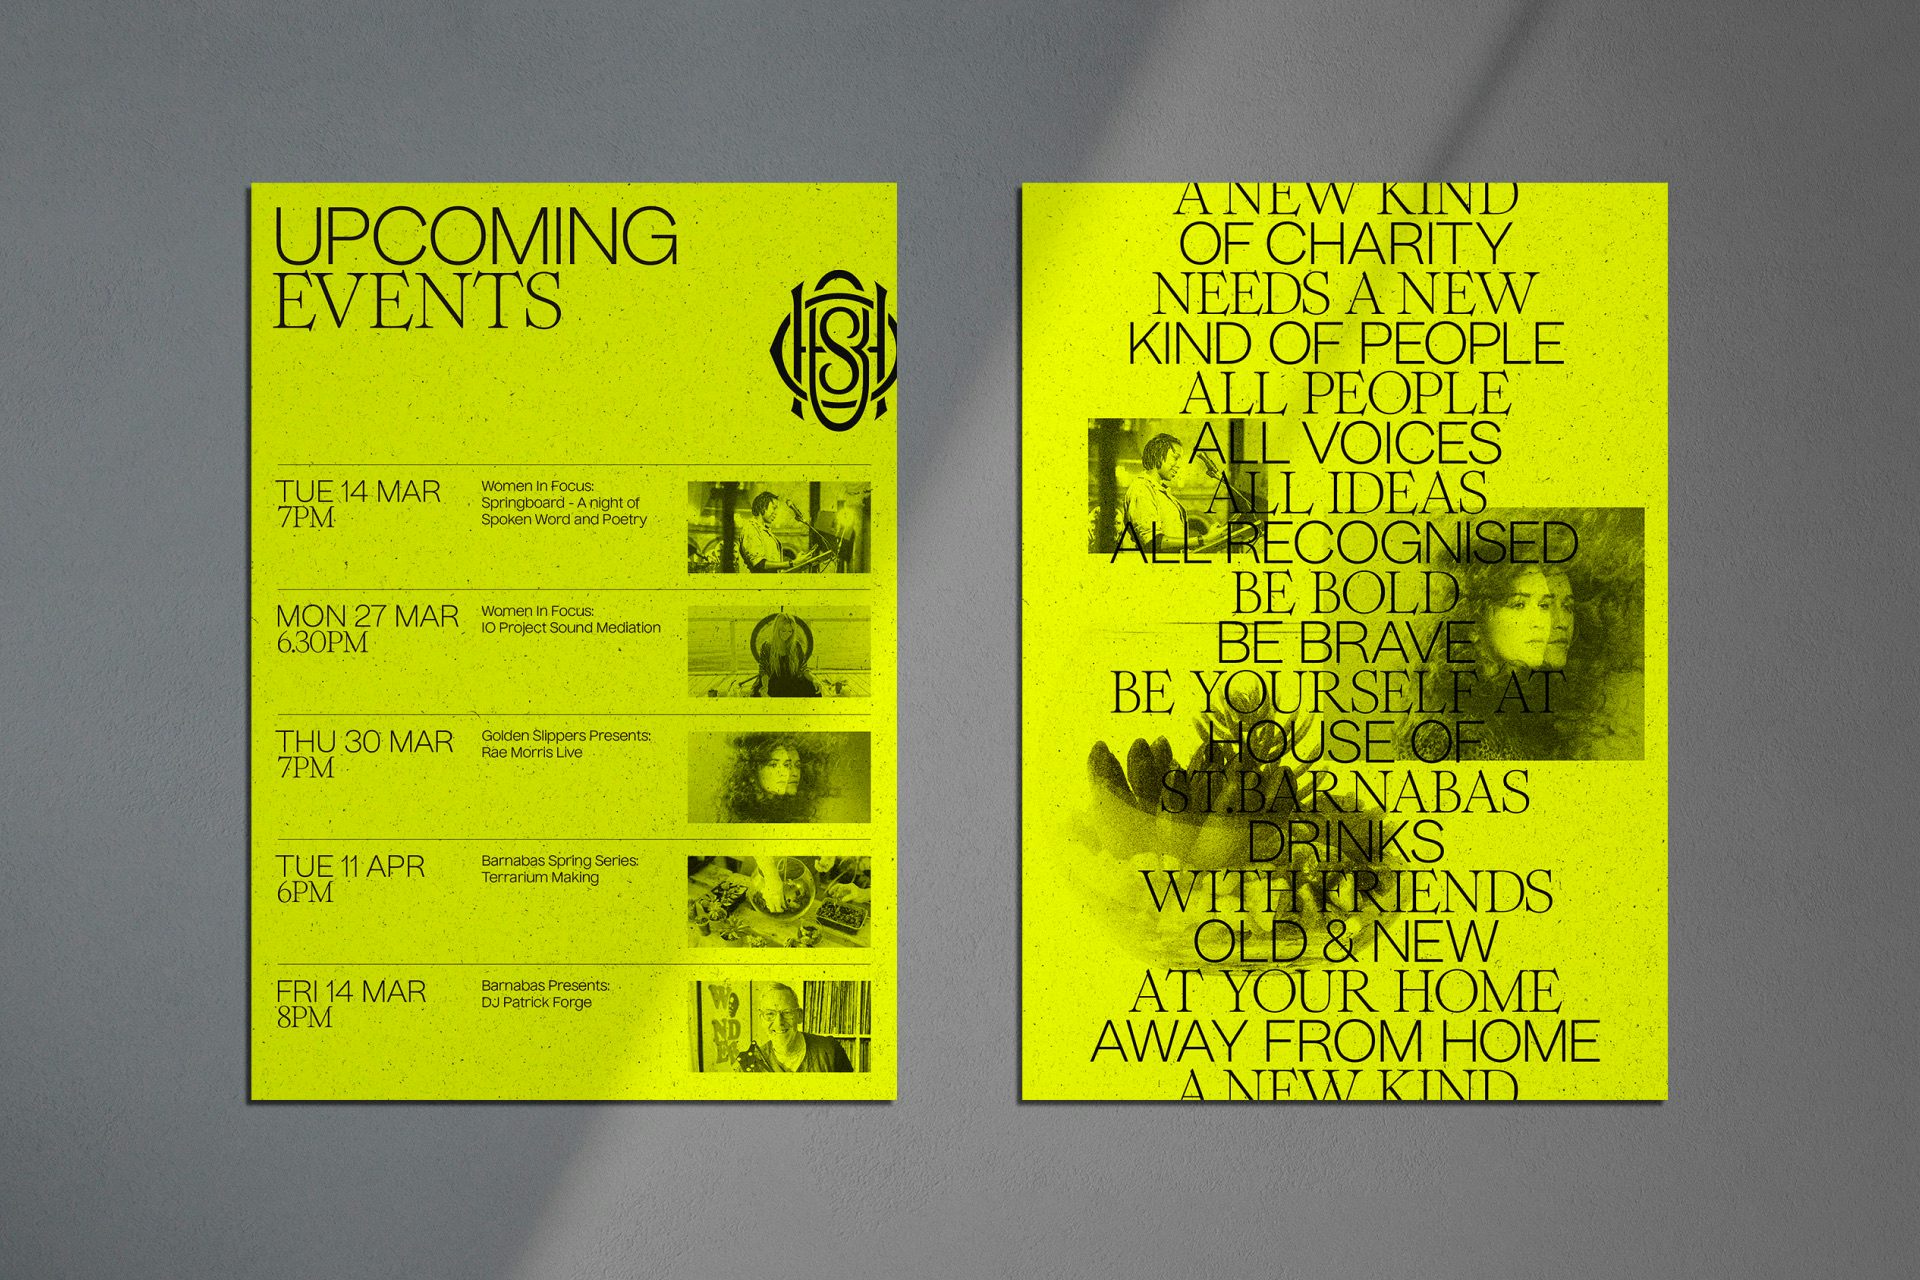 Image shows events posters for the House of St Barnabas, featuring text-heavy designs on a bright yellow background